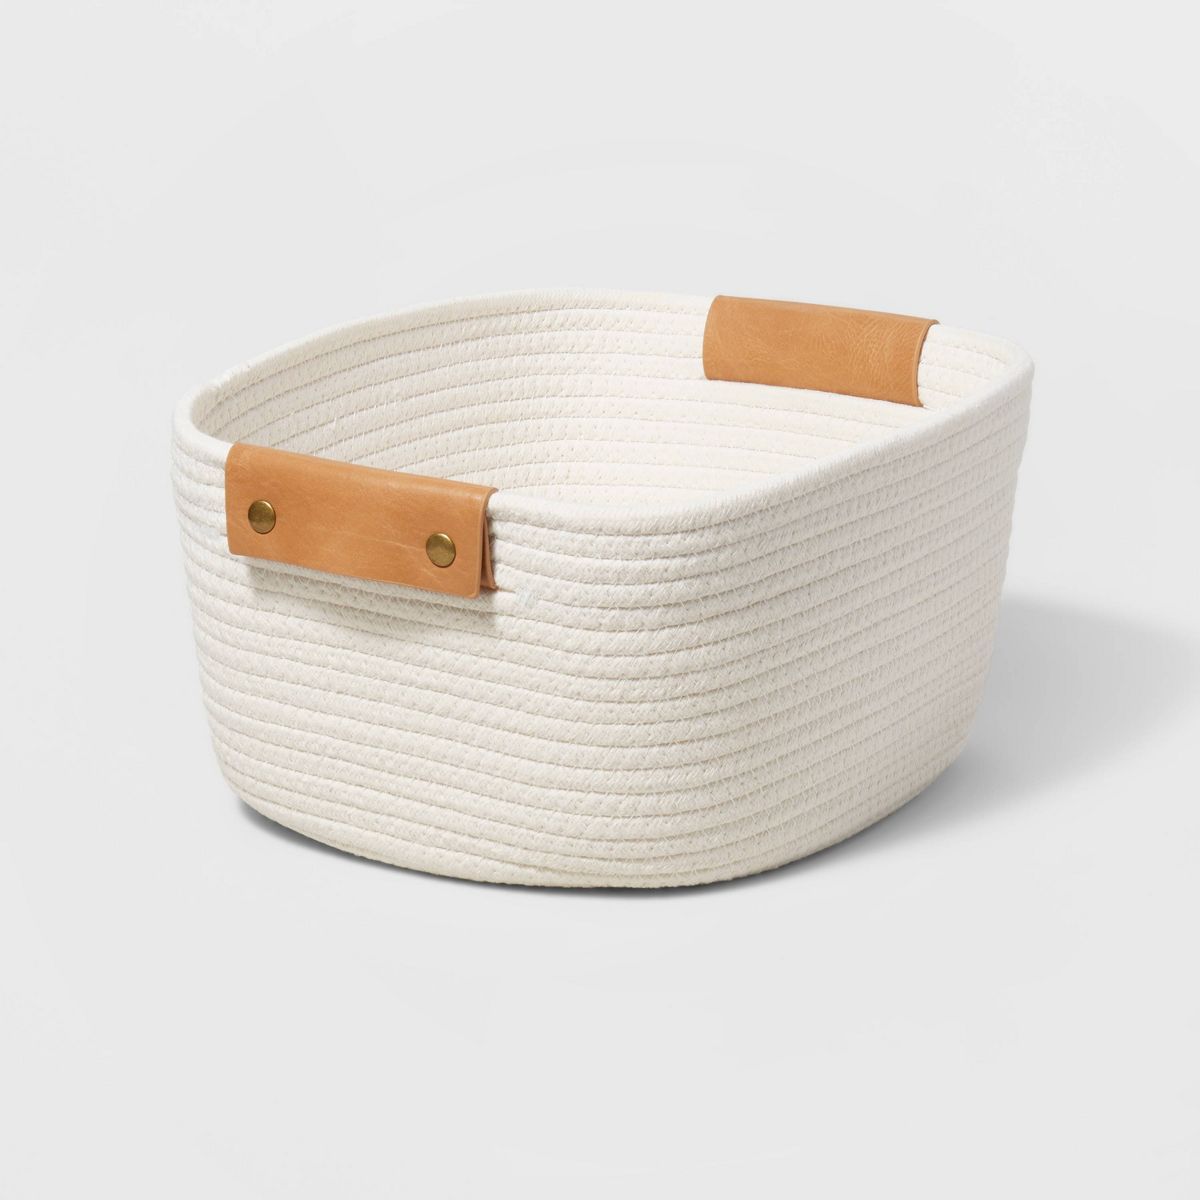 13" Decorative Coiled Rope Square Base Tapered Basket Small White - Brightroom™ | Target